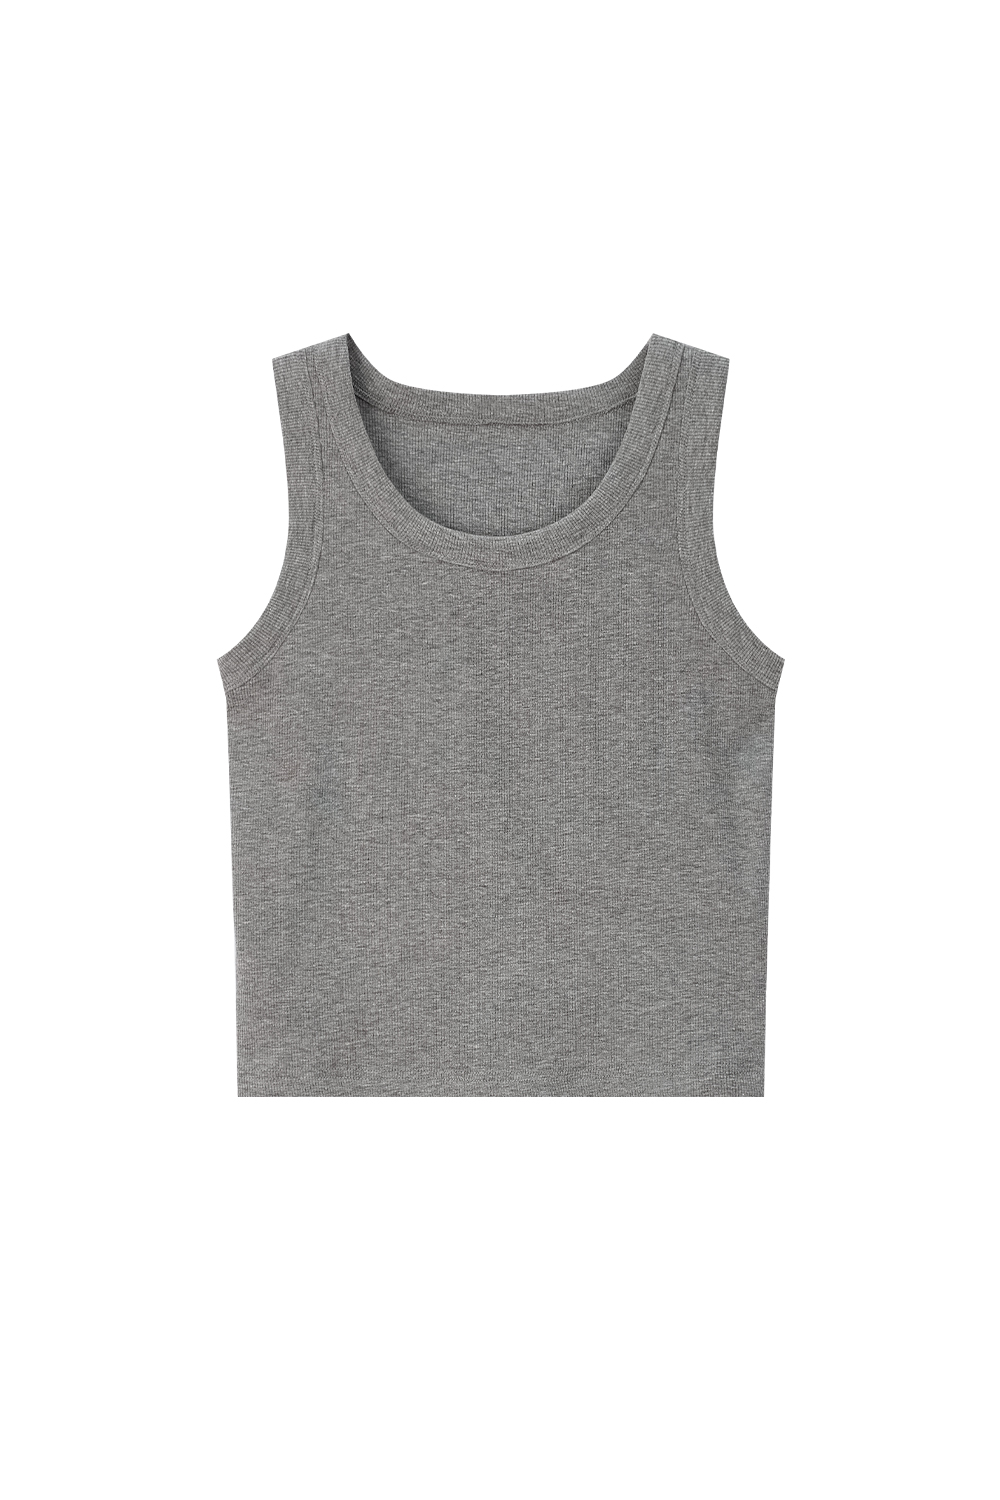 Selected Base Layer Vests